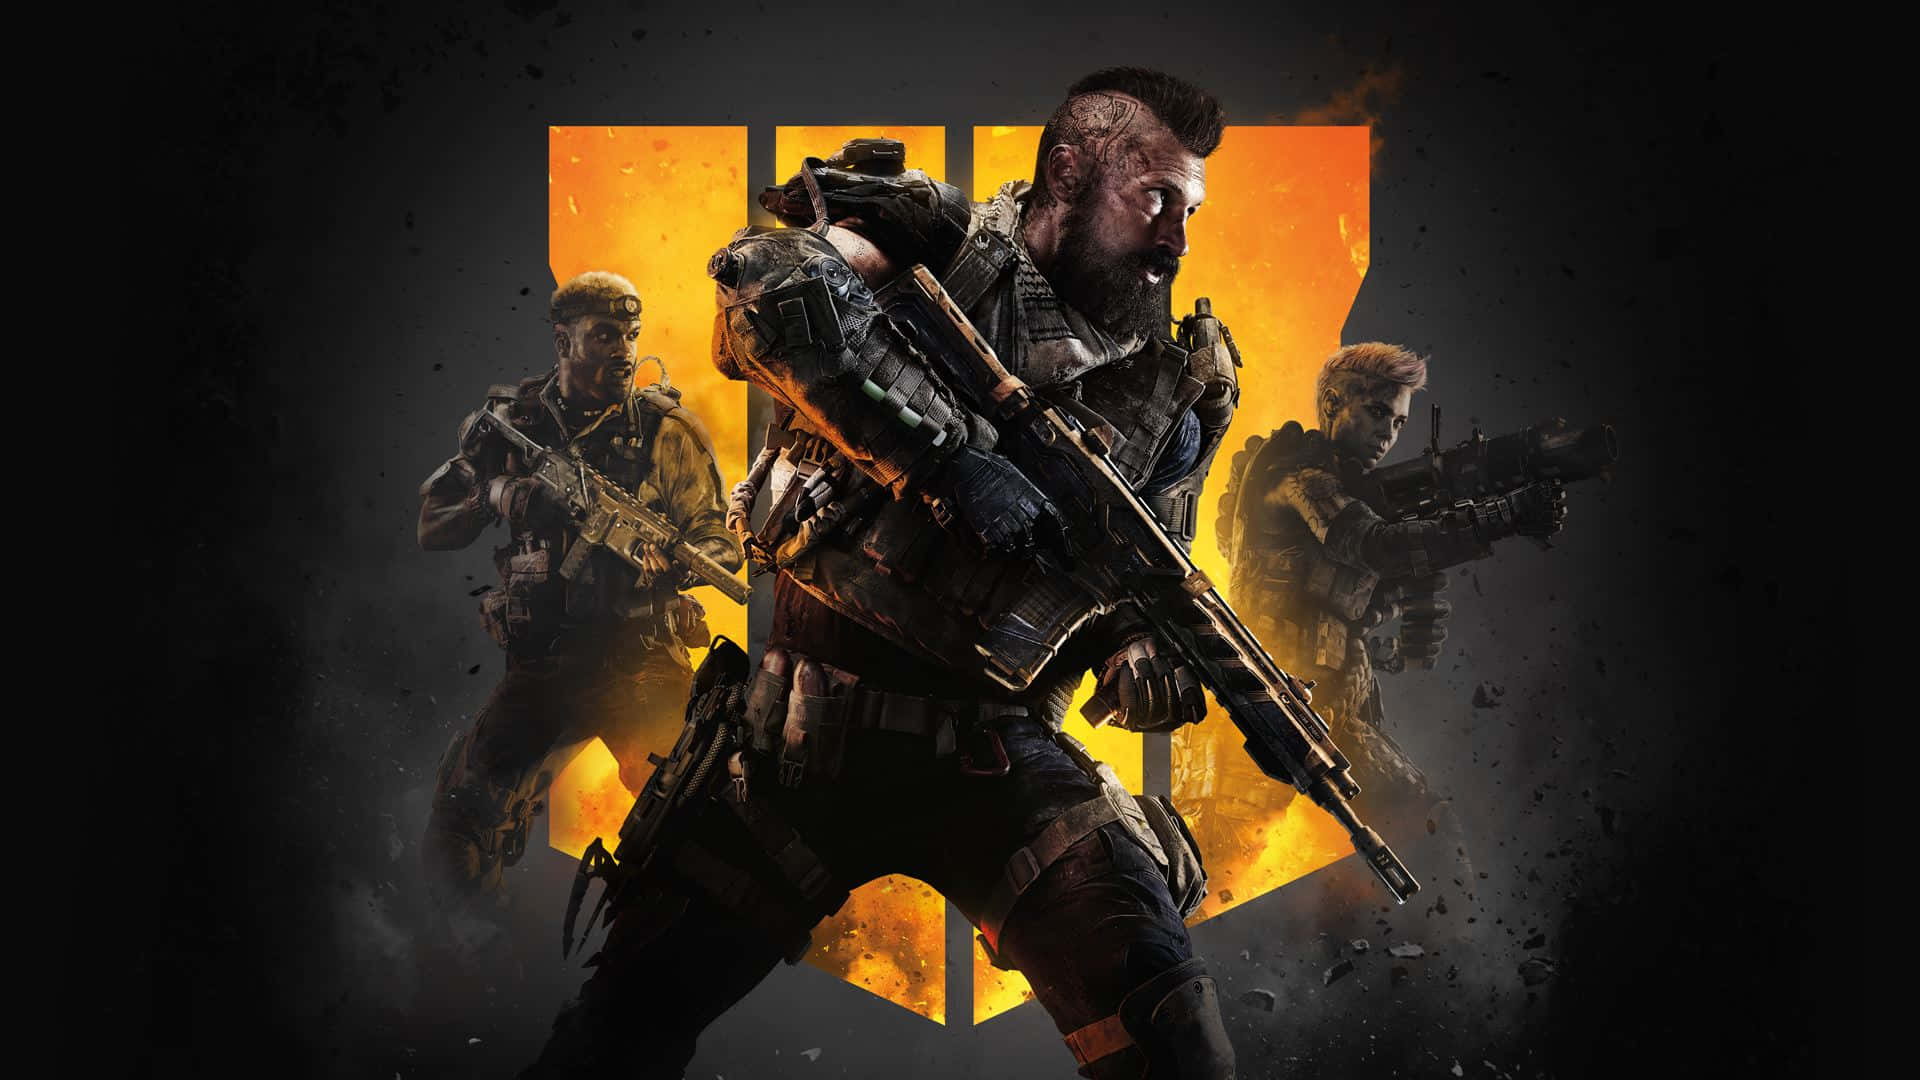 Enter a new world of warfare with Best Call of Duty: Black Ops 4